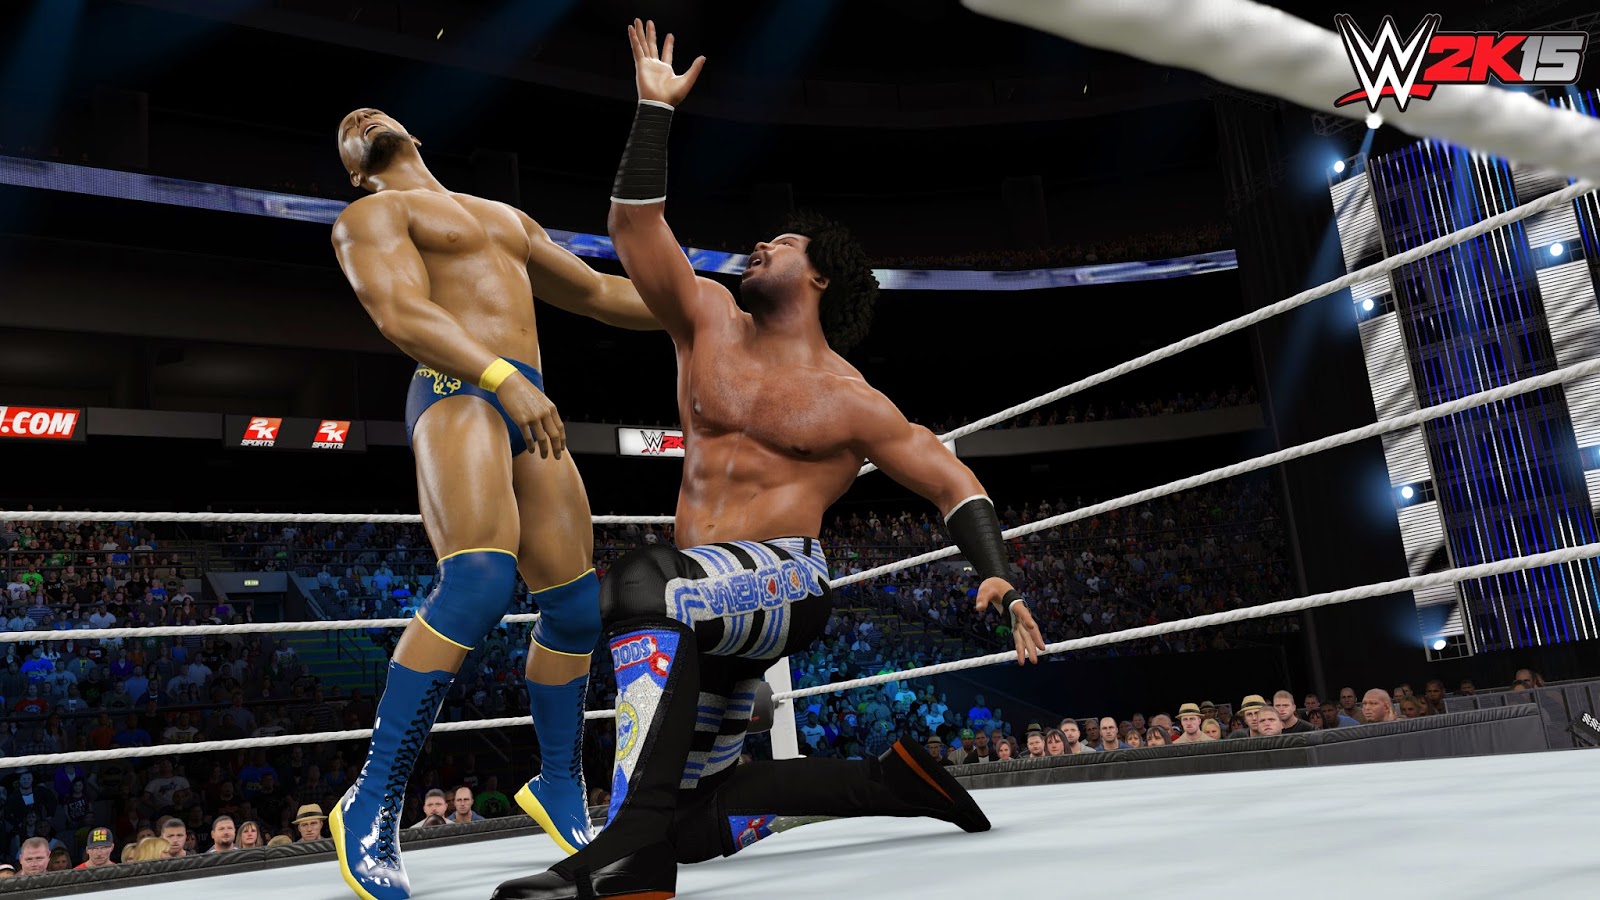 Download WWE 2K15 (Wrestling) Full Version Game - The Ultimate Place